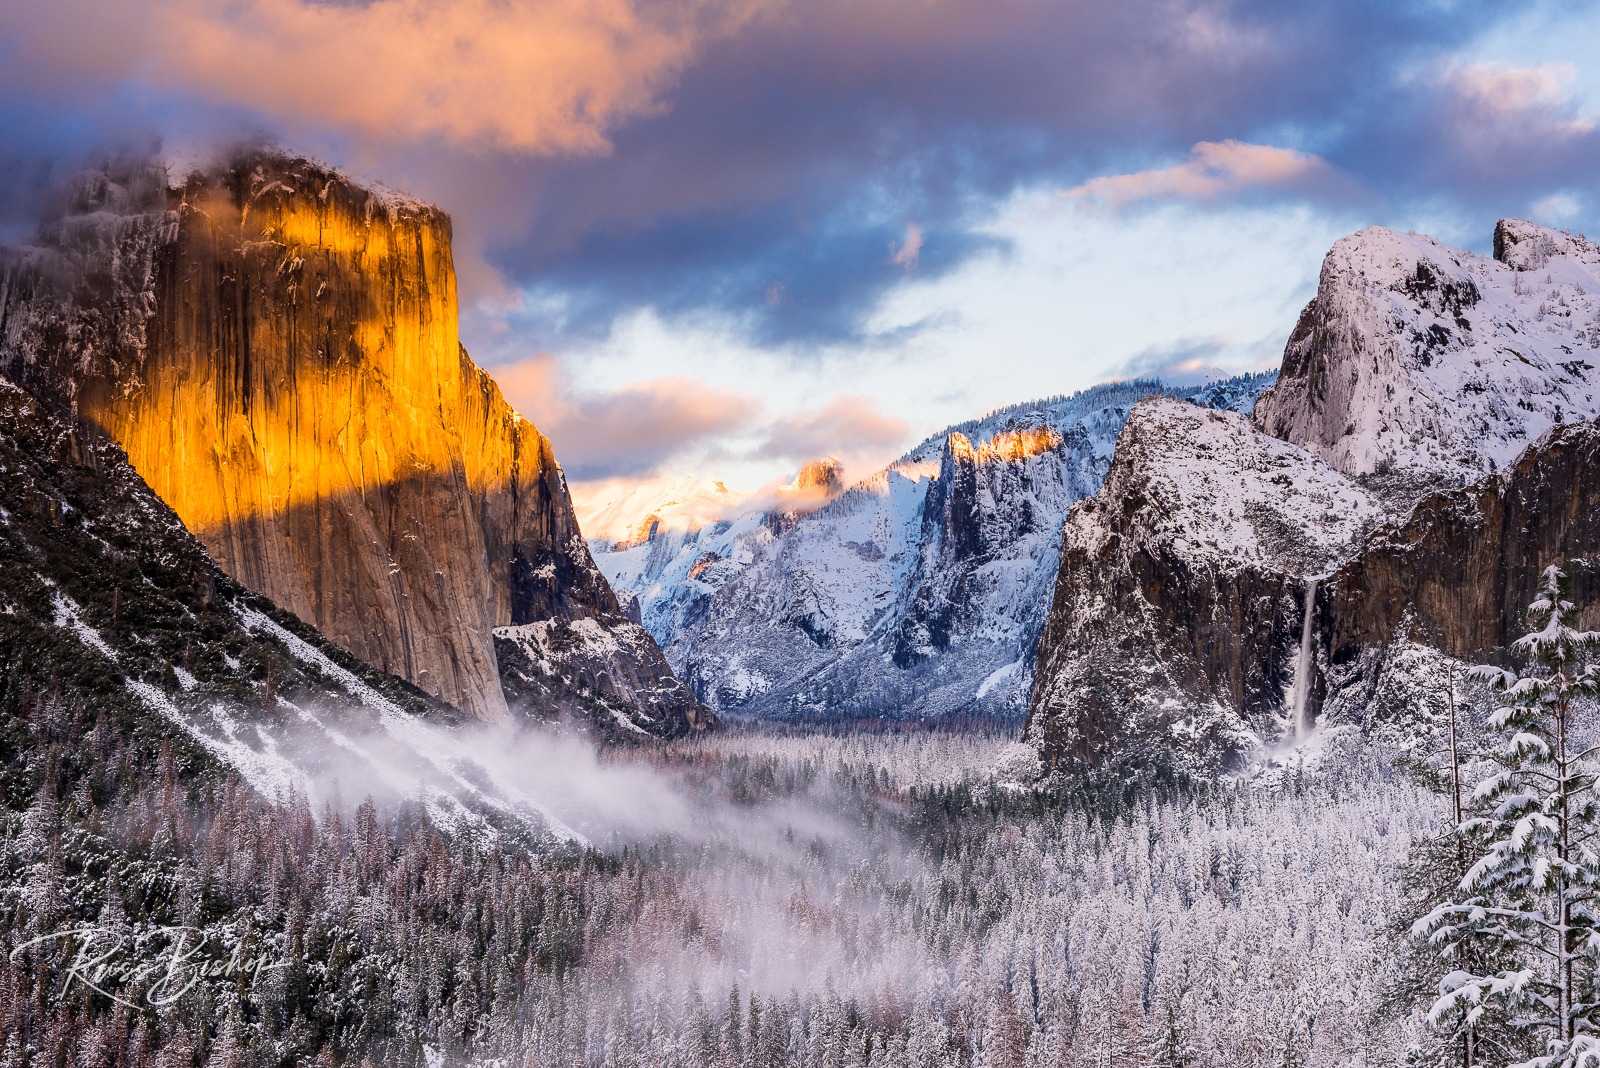 Winter sunset over Yosemite Valley from Tunnel View, Yosemite National Park, California USA